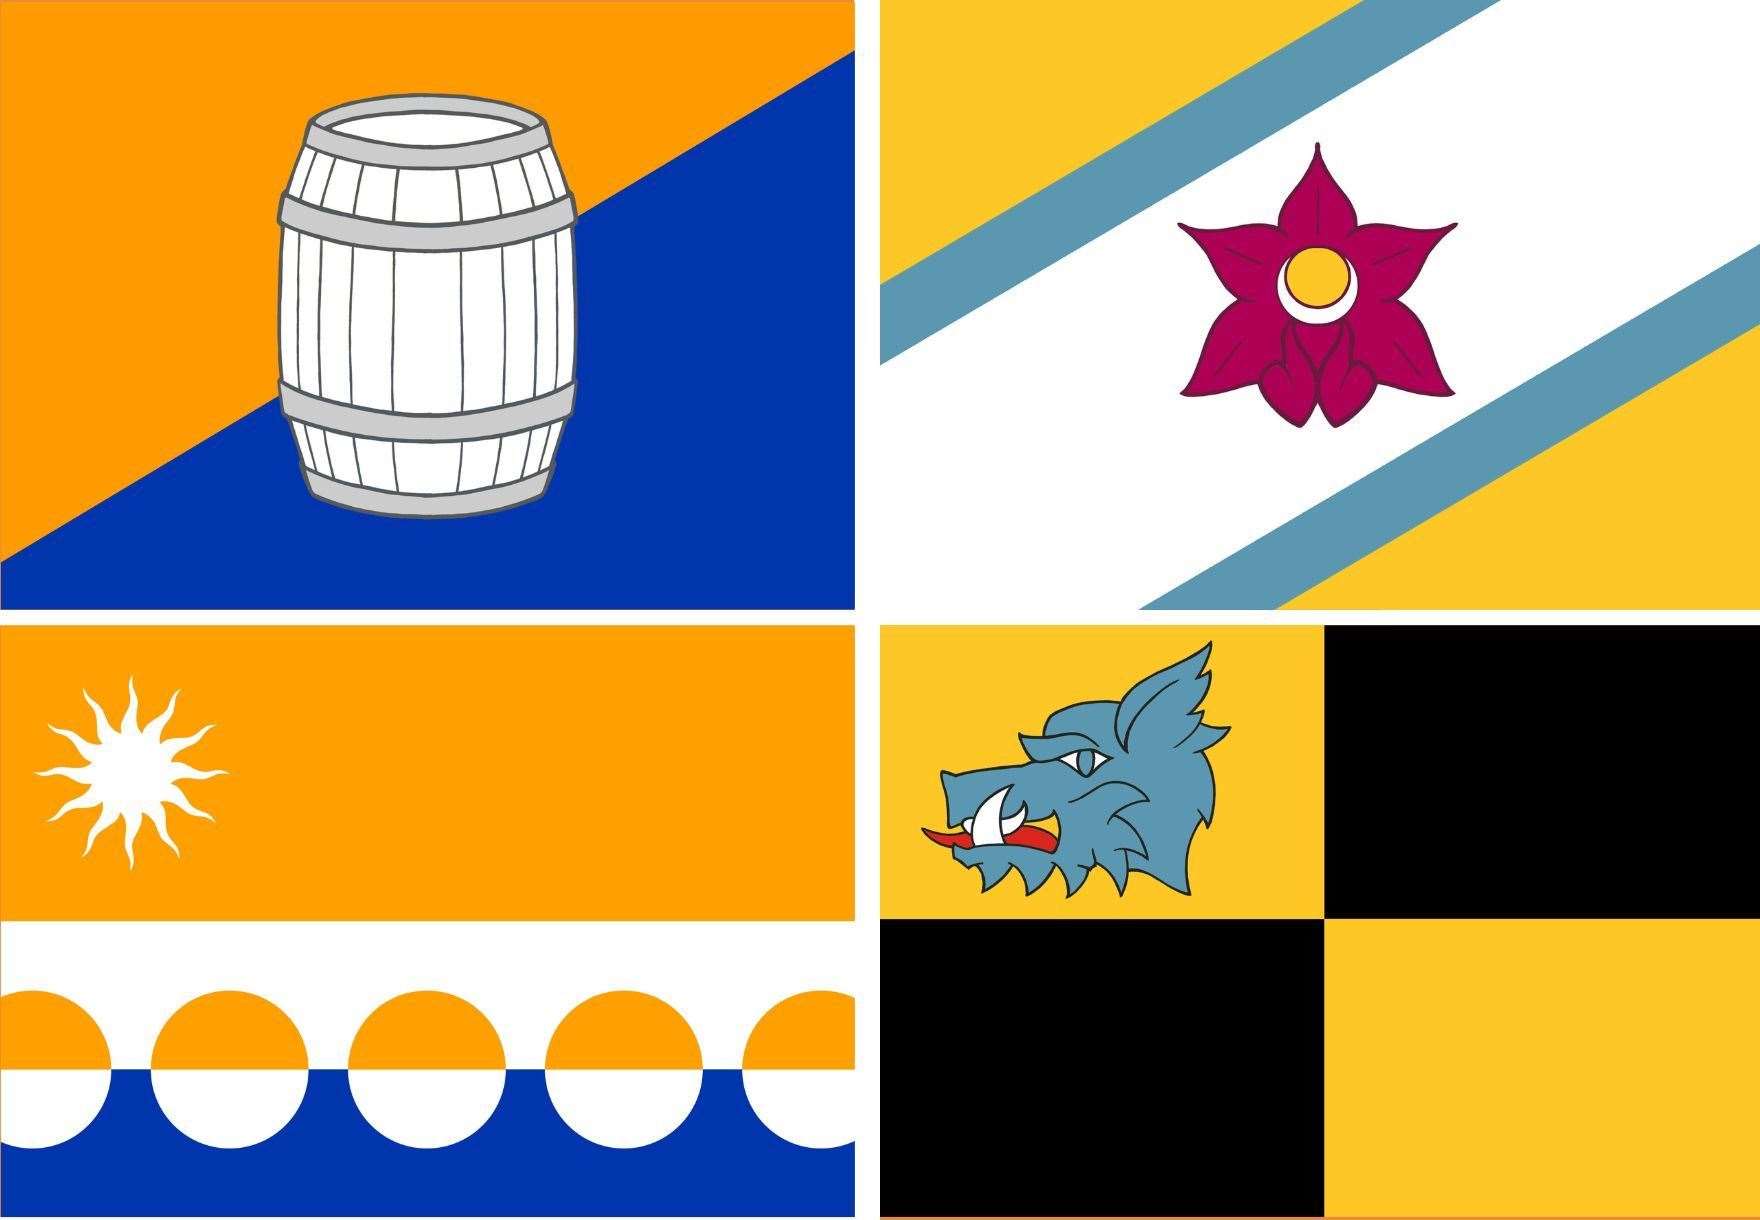 The public will be able to choose between these four designs, with the winner to be Banffshire's new flag.